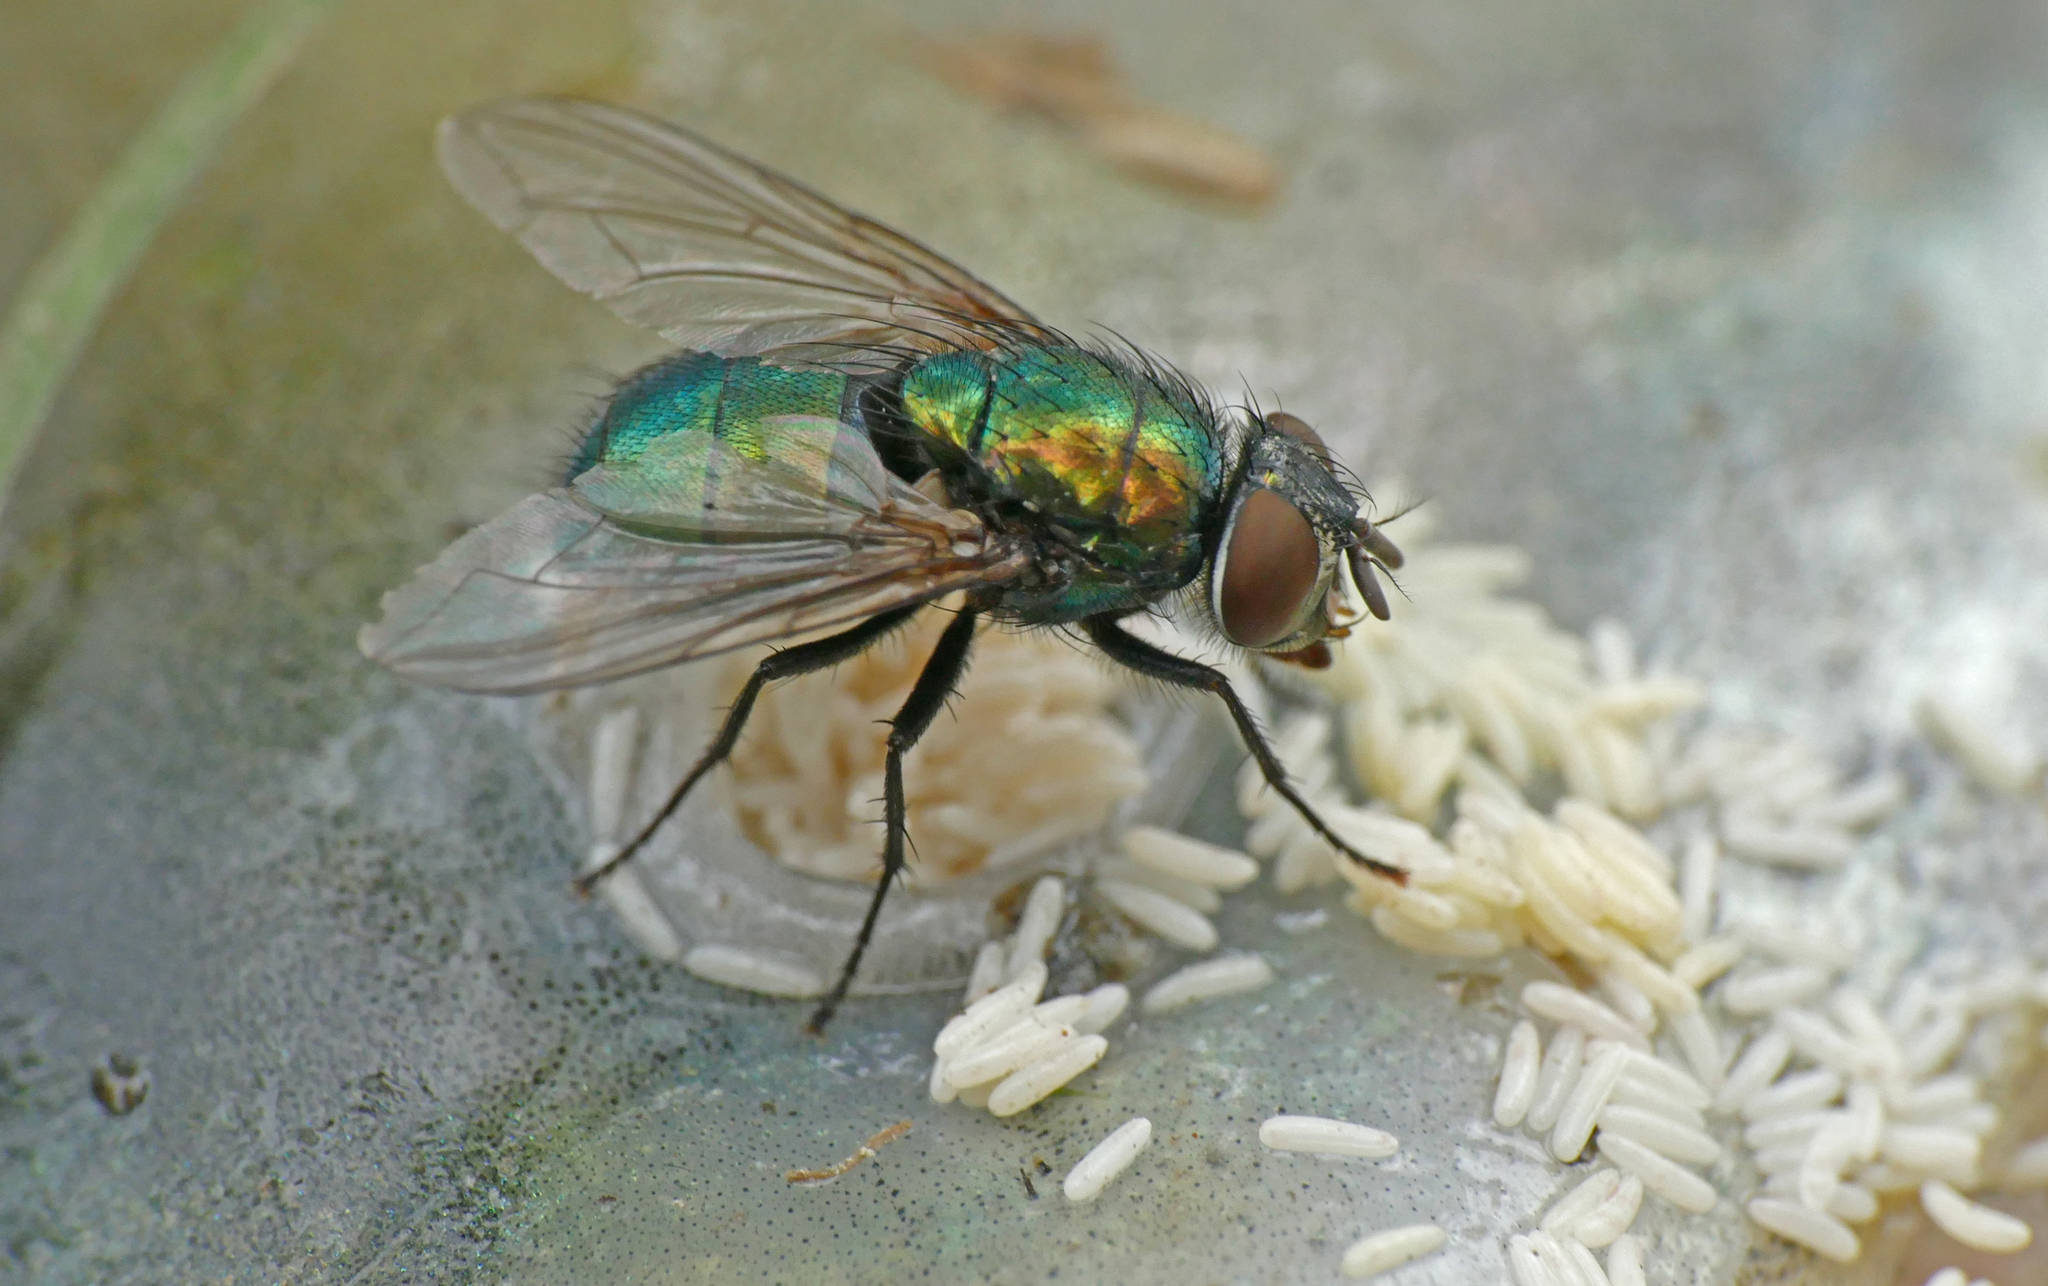 Courtesy Photo | Bob Armstrong                                 This iridescent blow fly was once a more plainly colored maggot. Arthropods, such as insects and crustaceans, and their distant relatives called nematodes (round worms) are two groups that live complex life cycles.